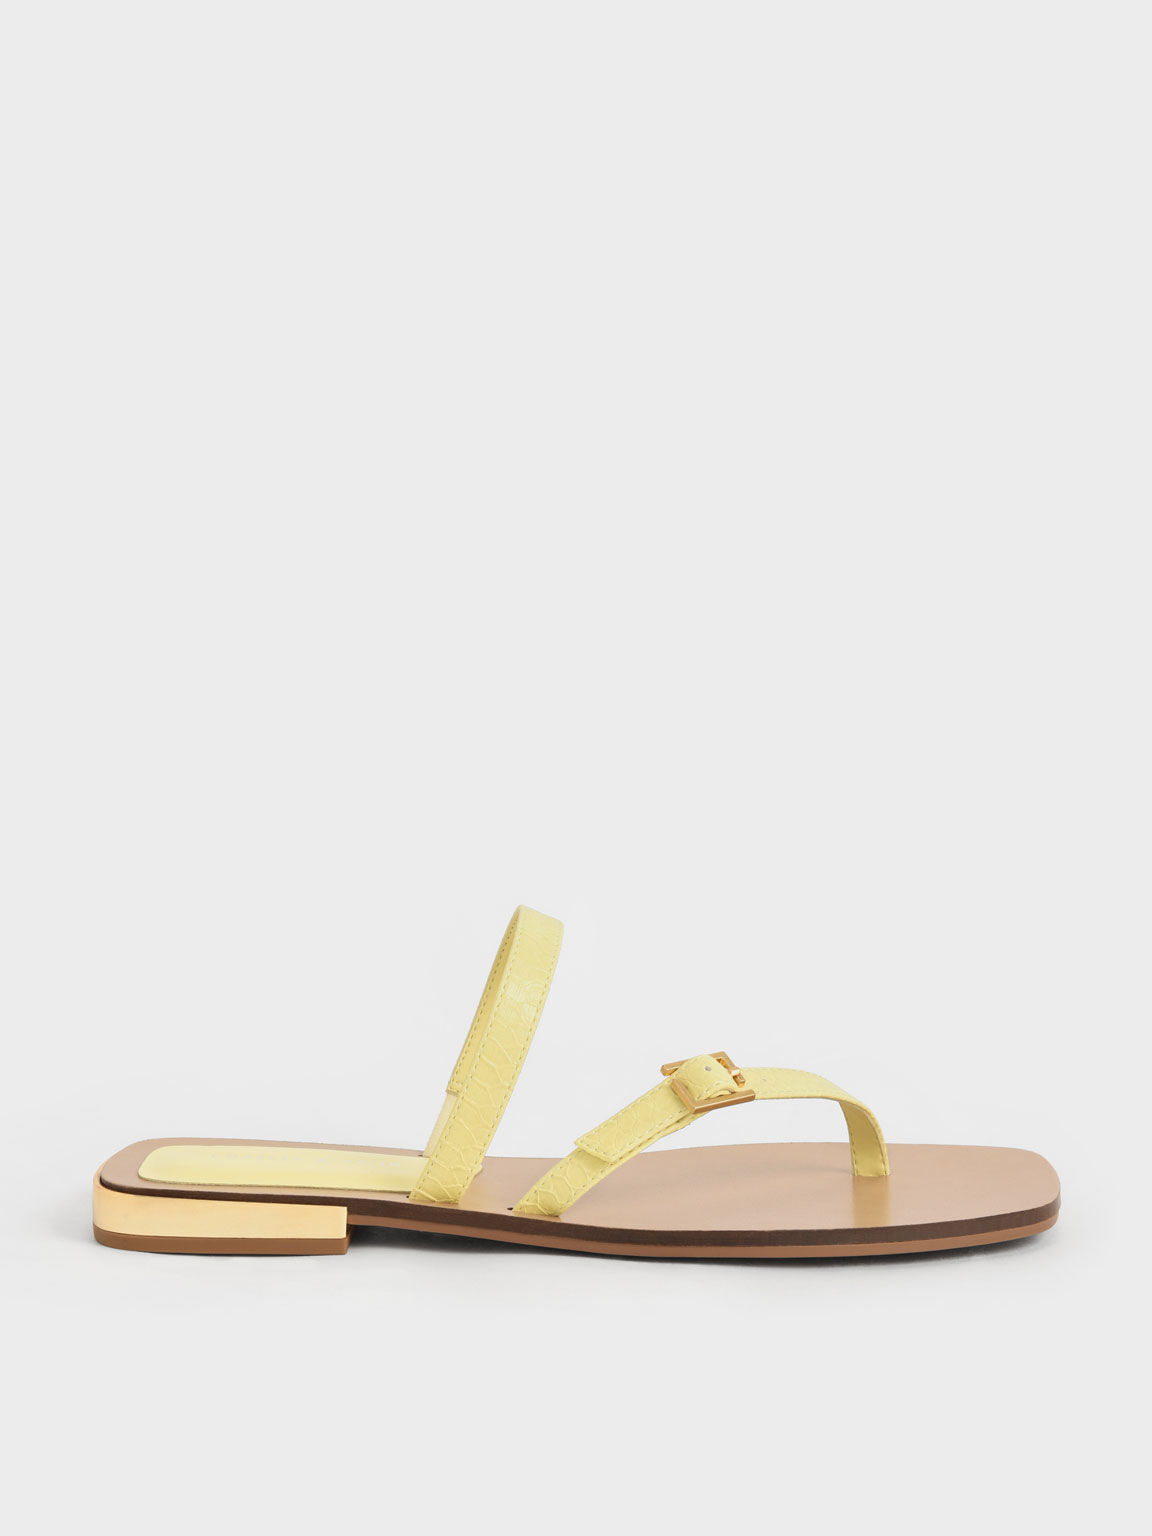 Women's Sandals | Shop Exclusive Styles - CHARLES & KEITH SG